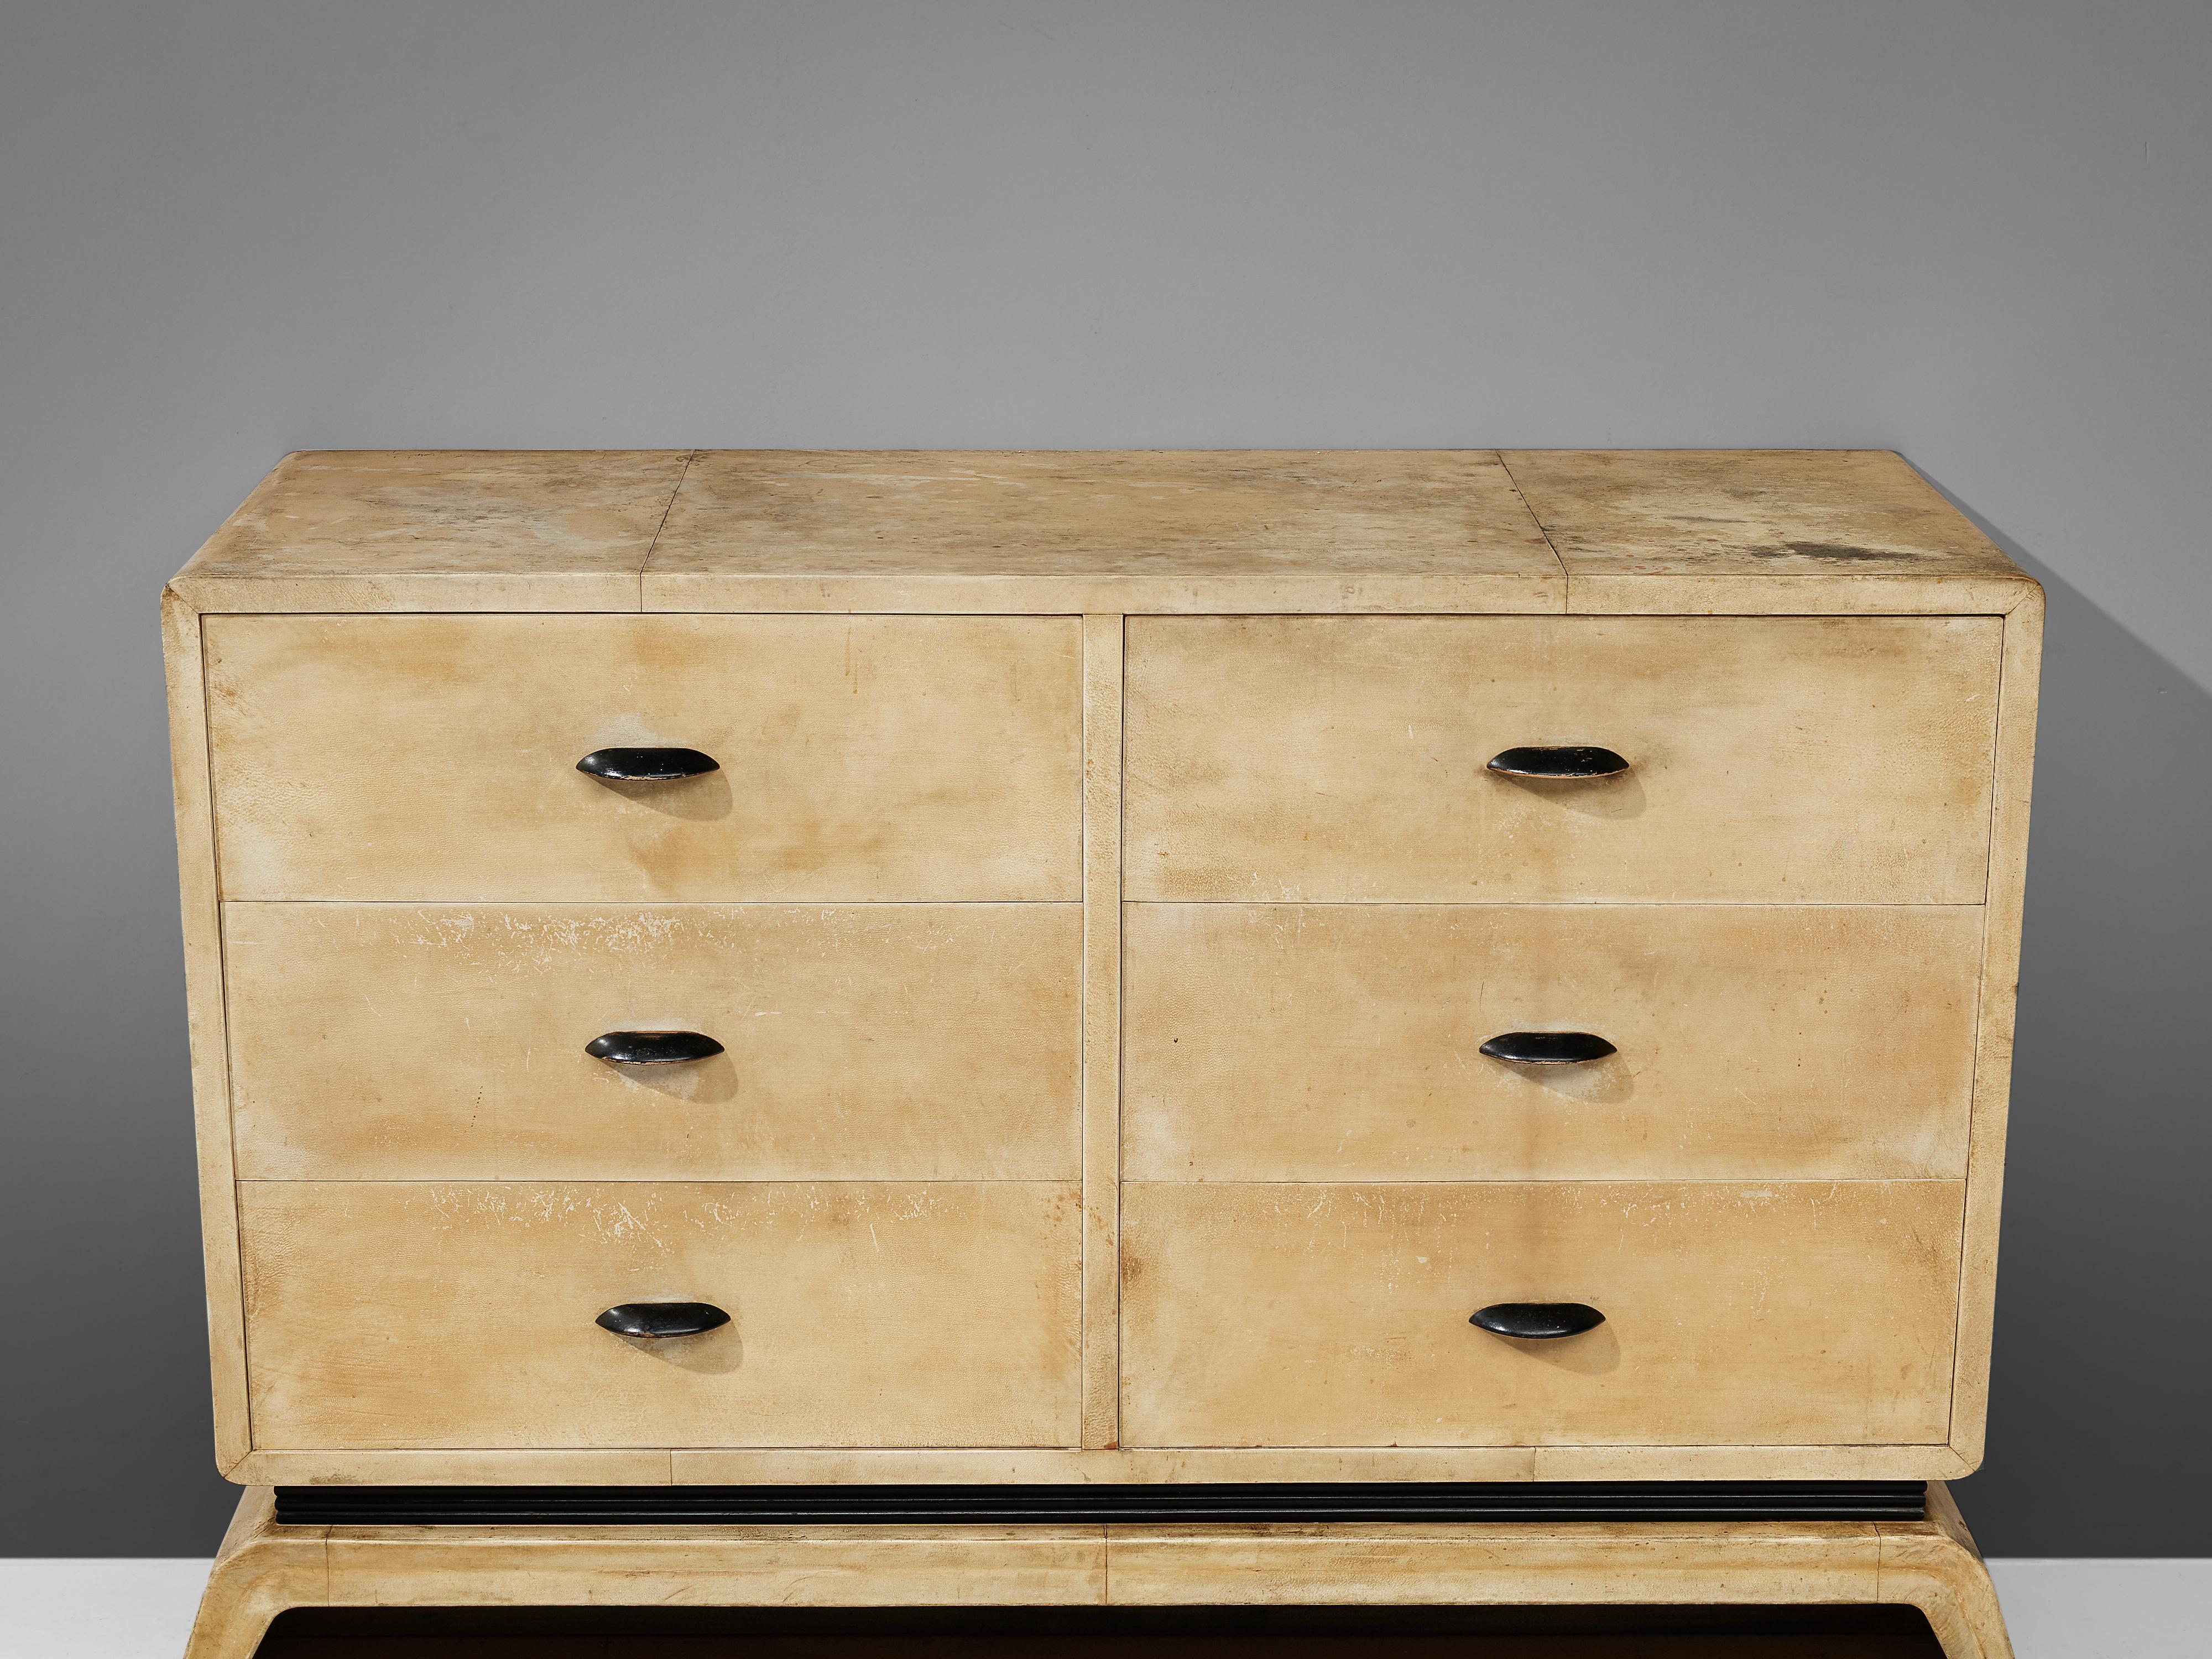 Wood Rare Valzania Sideboard with Drawers in Parchment